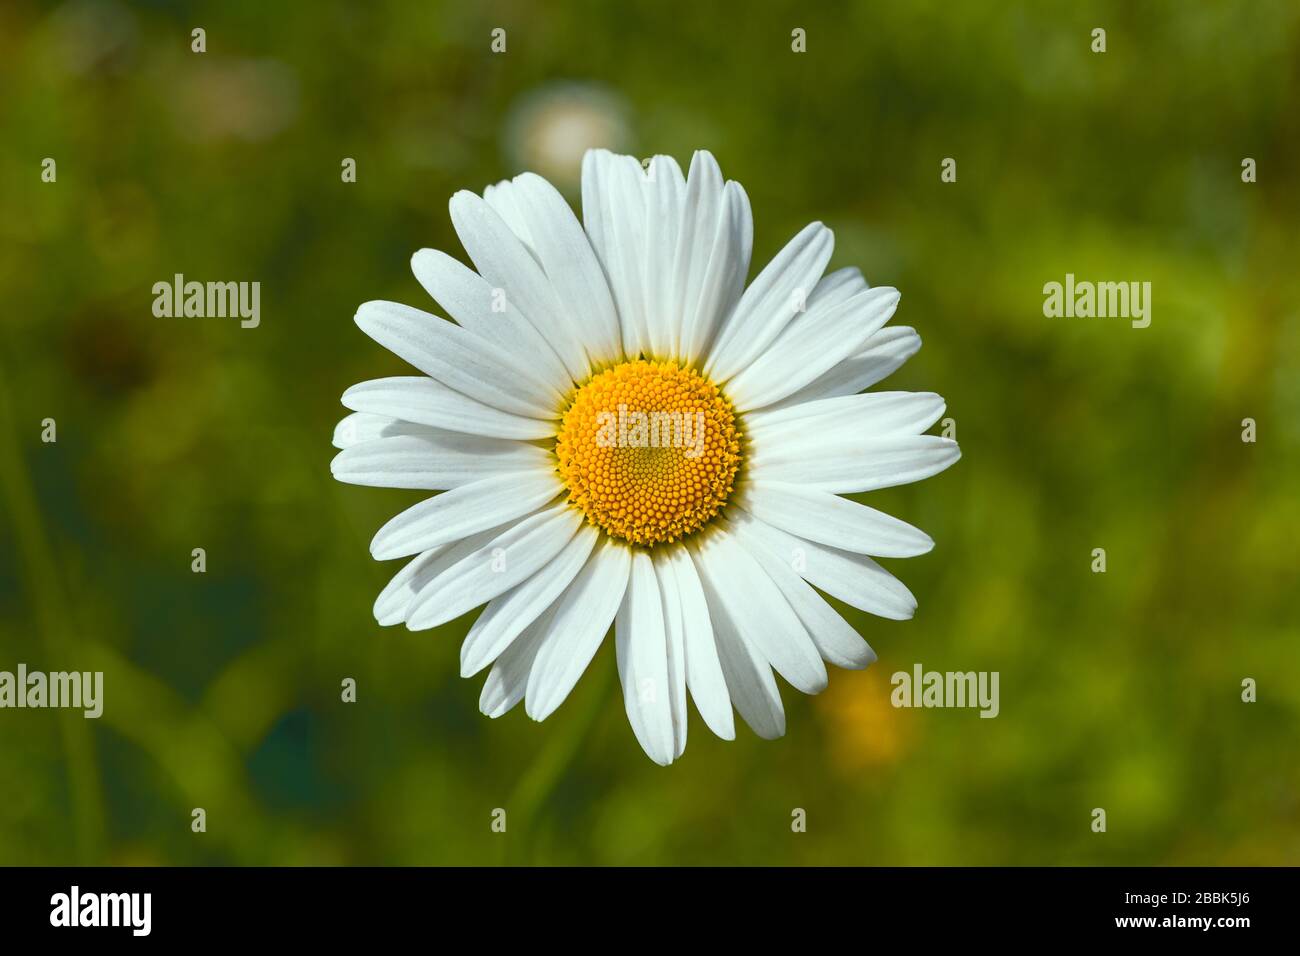 Summer blooming white daisy flower on the green grass background Stock Photo